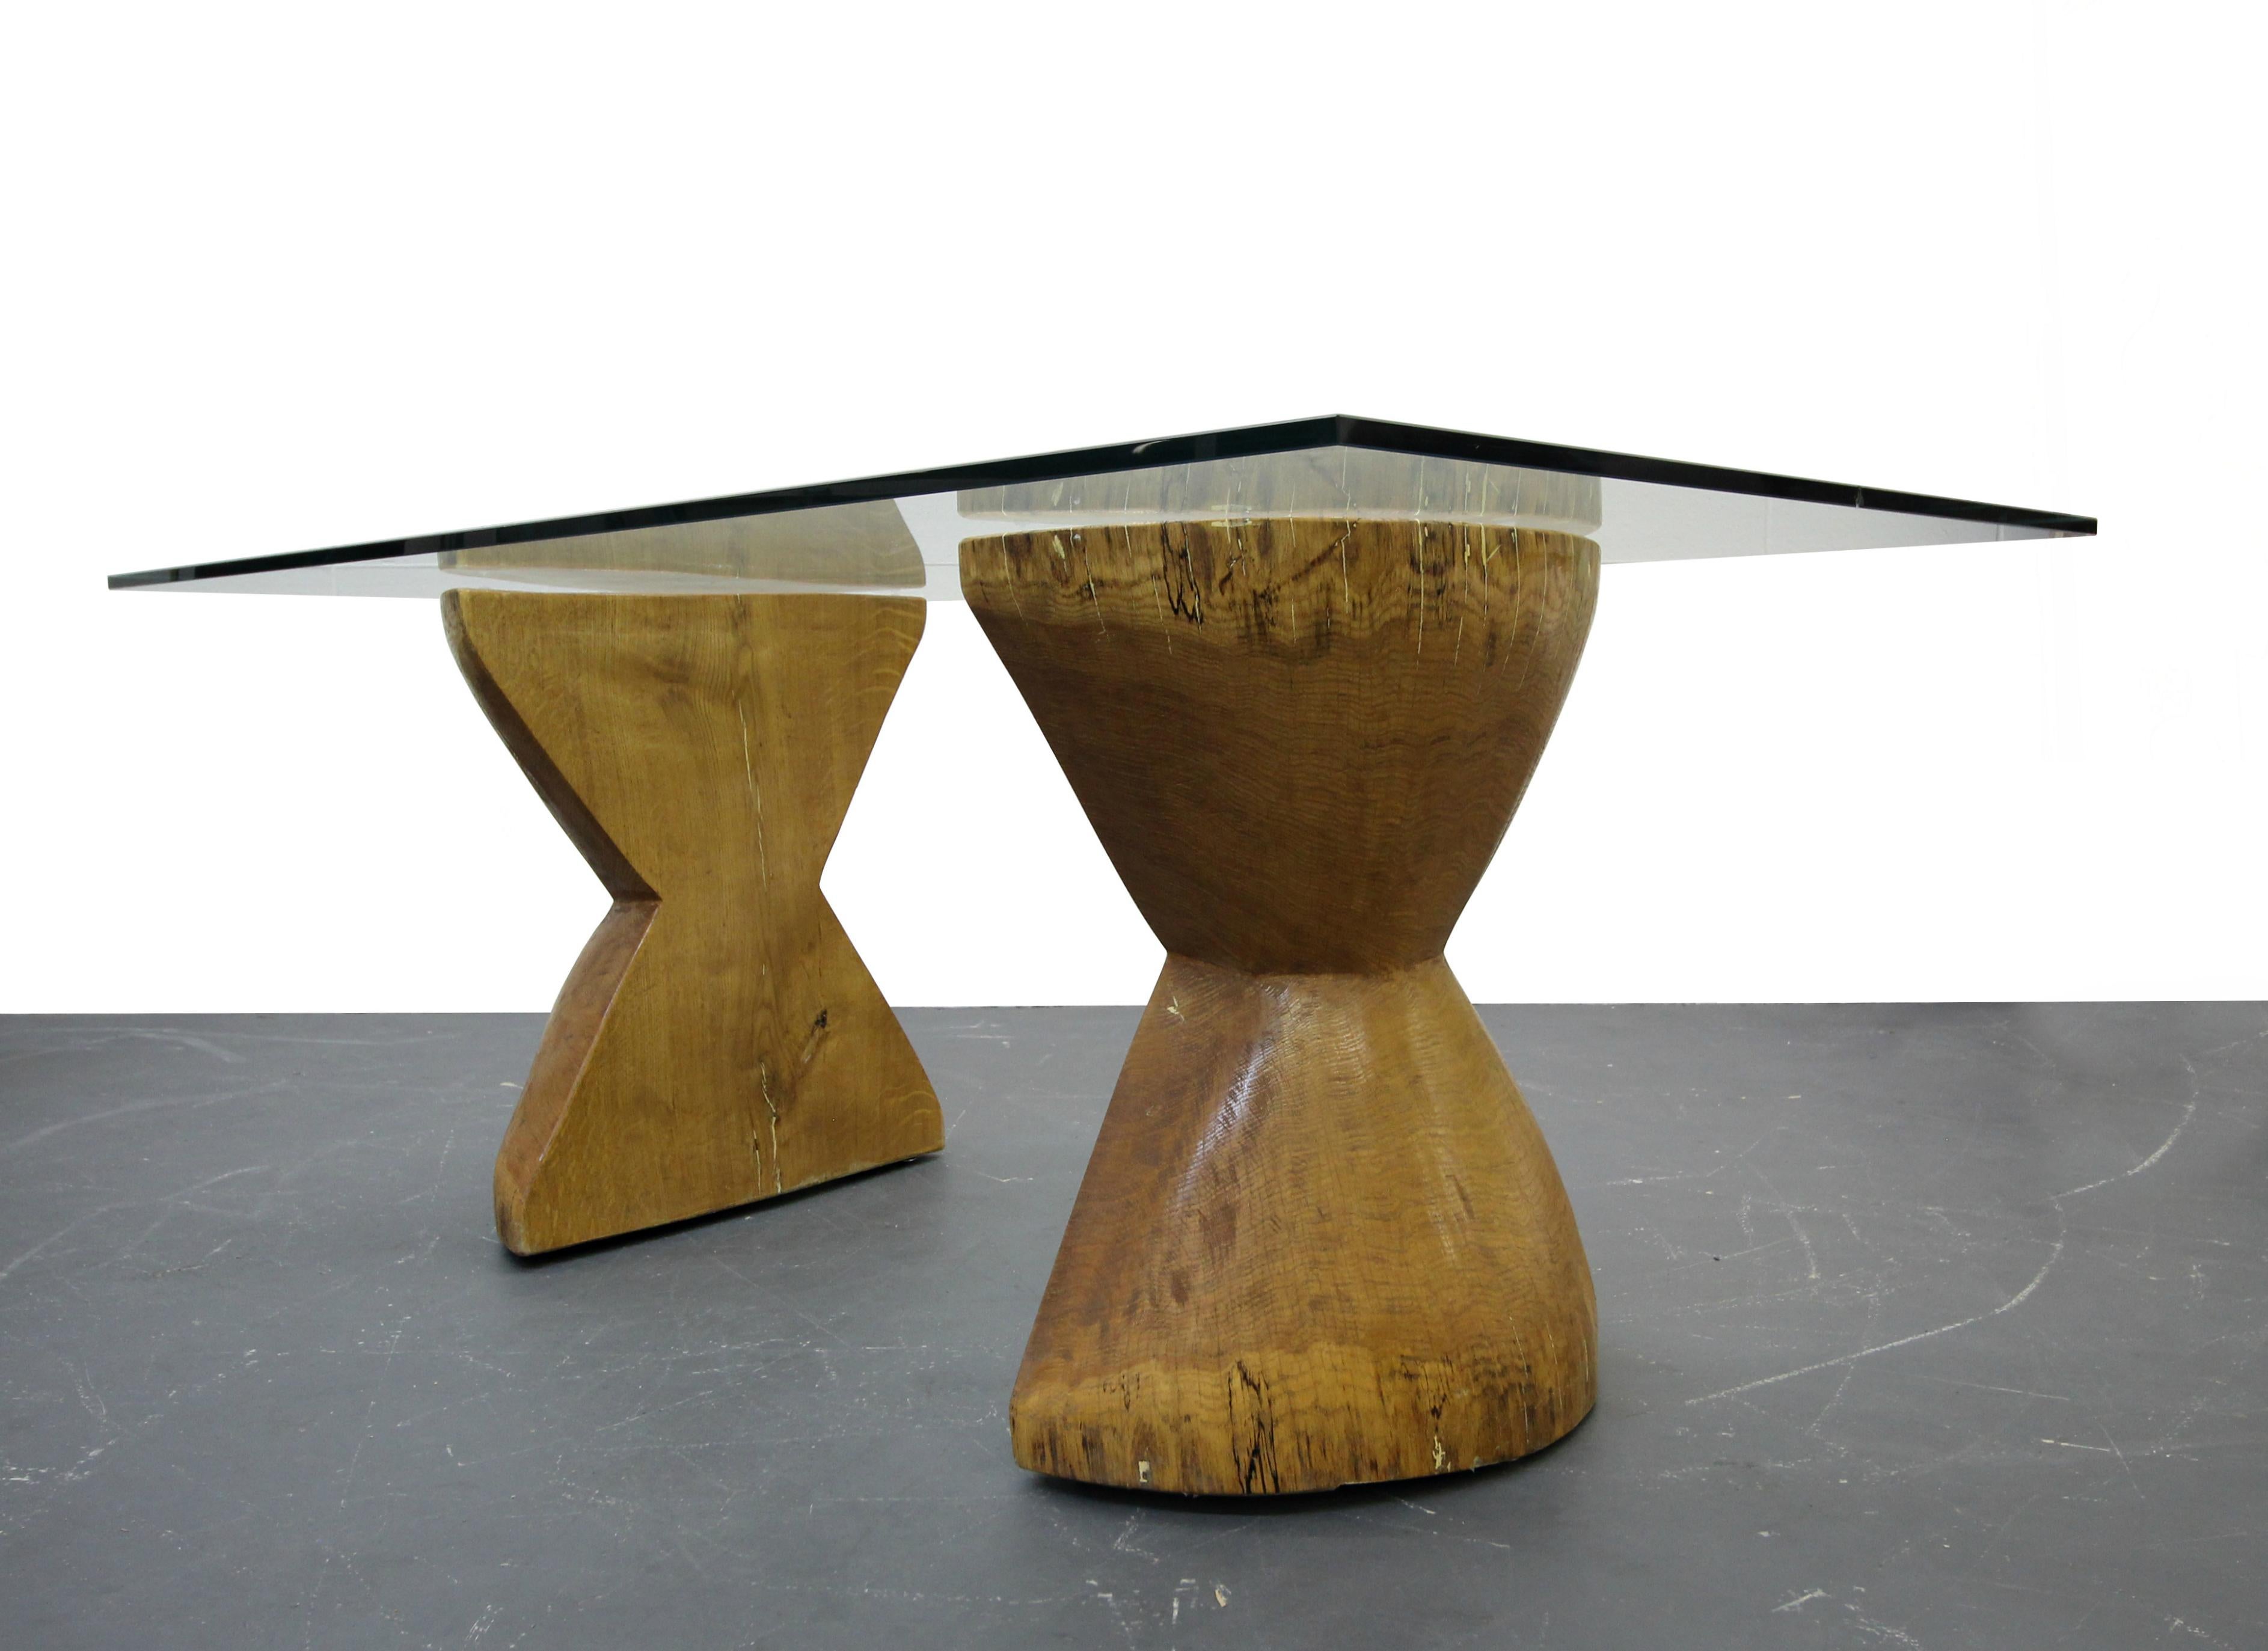 Completely unique and one of a kind twist to your traditional live edge table. These hourglass shaped pedestals are solid wood and could easily support a huge piece of glass. They would make a beautiful dining table or desk. Very clean Minimalist